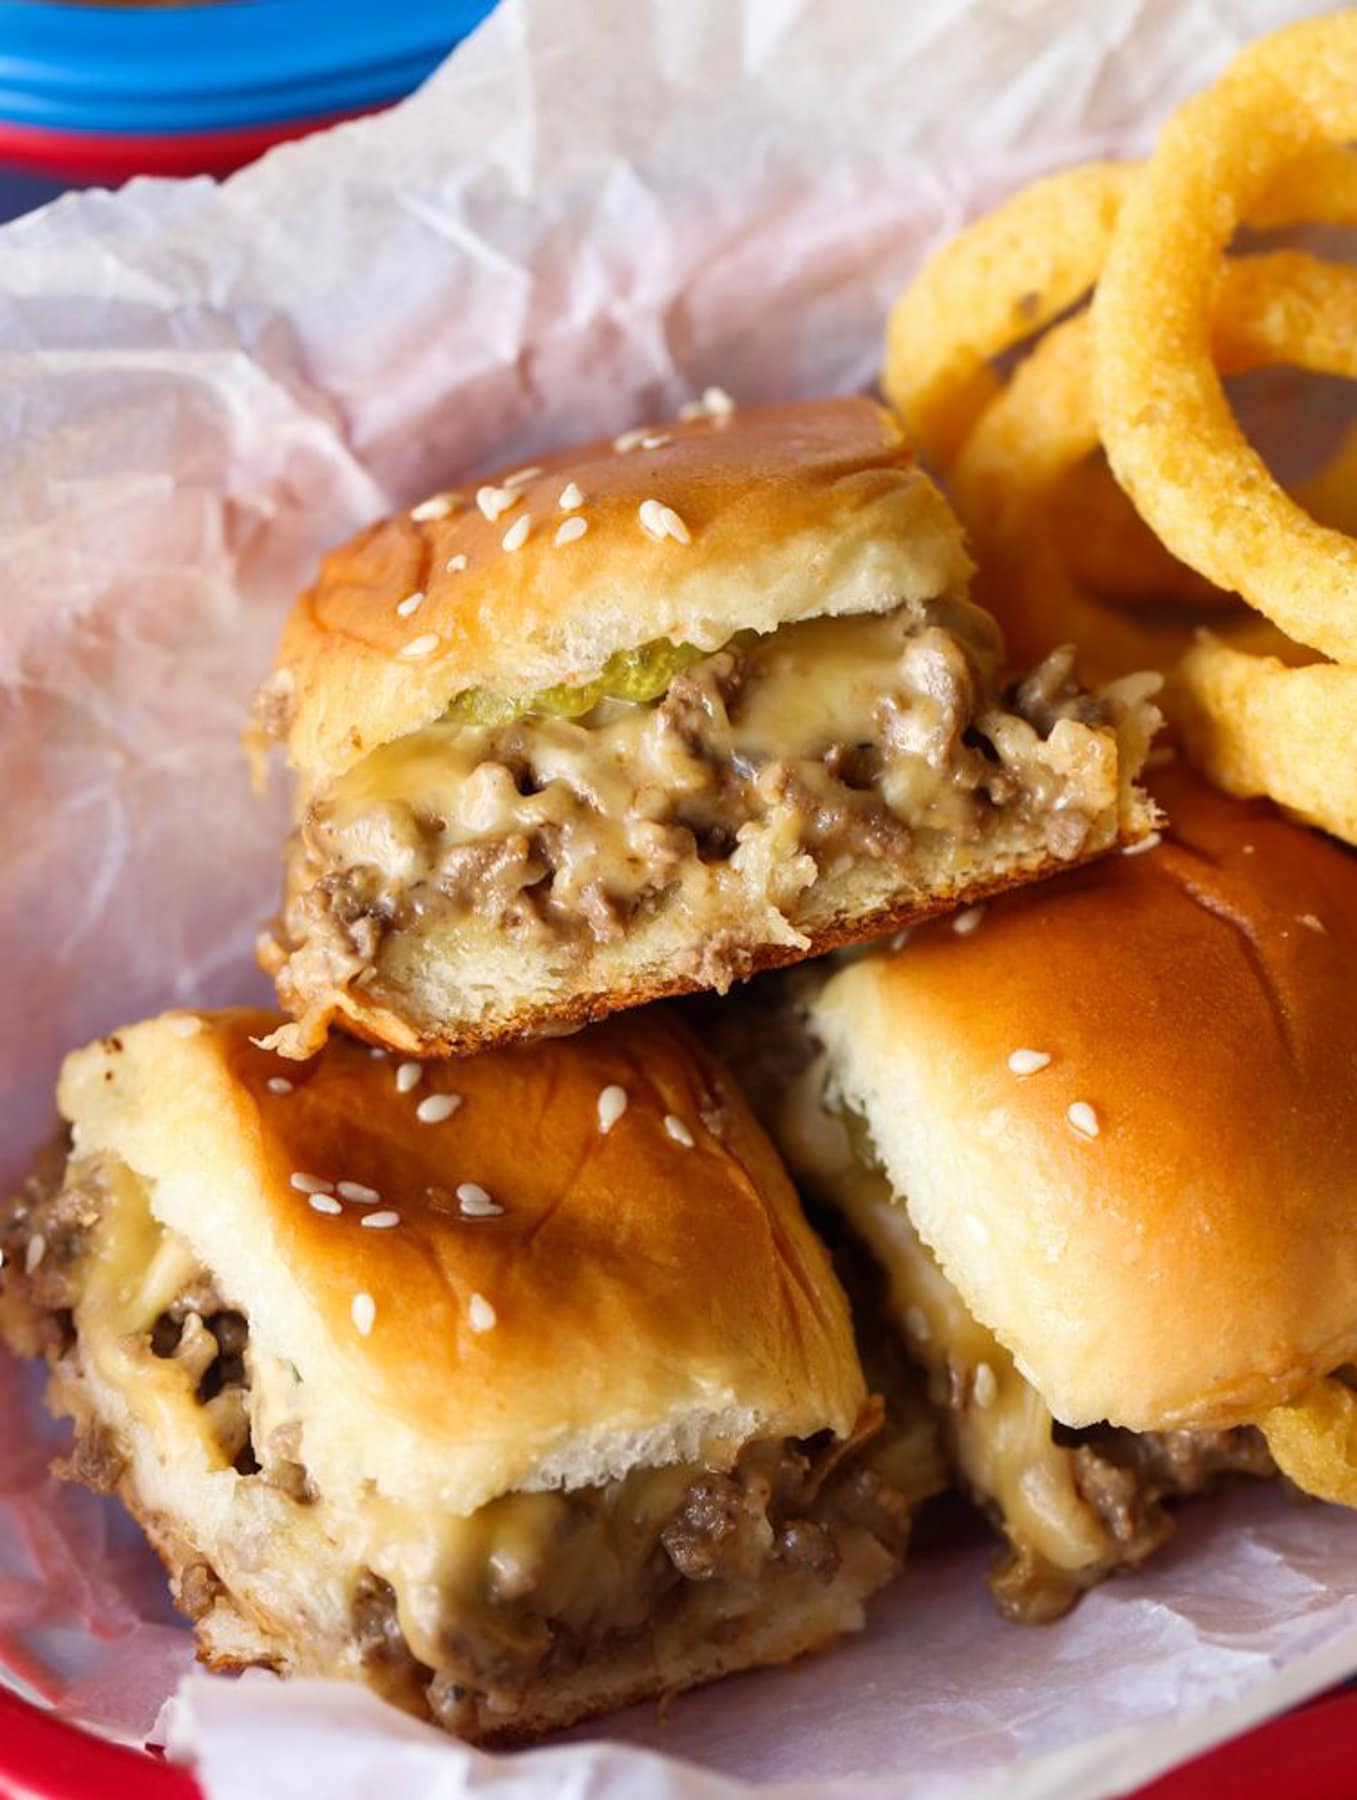 Cheeseburger sliders on a tray with onion rings.